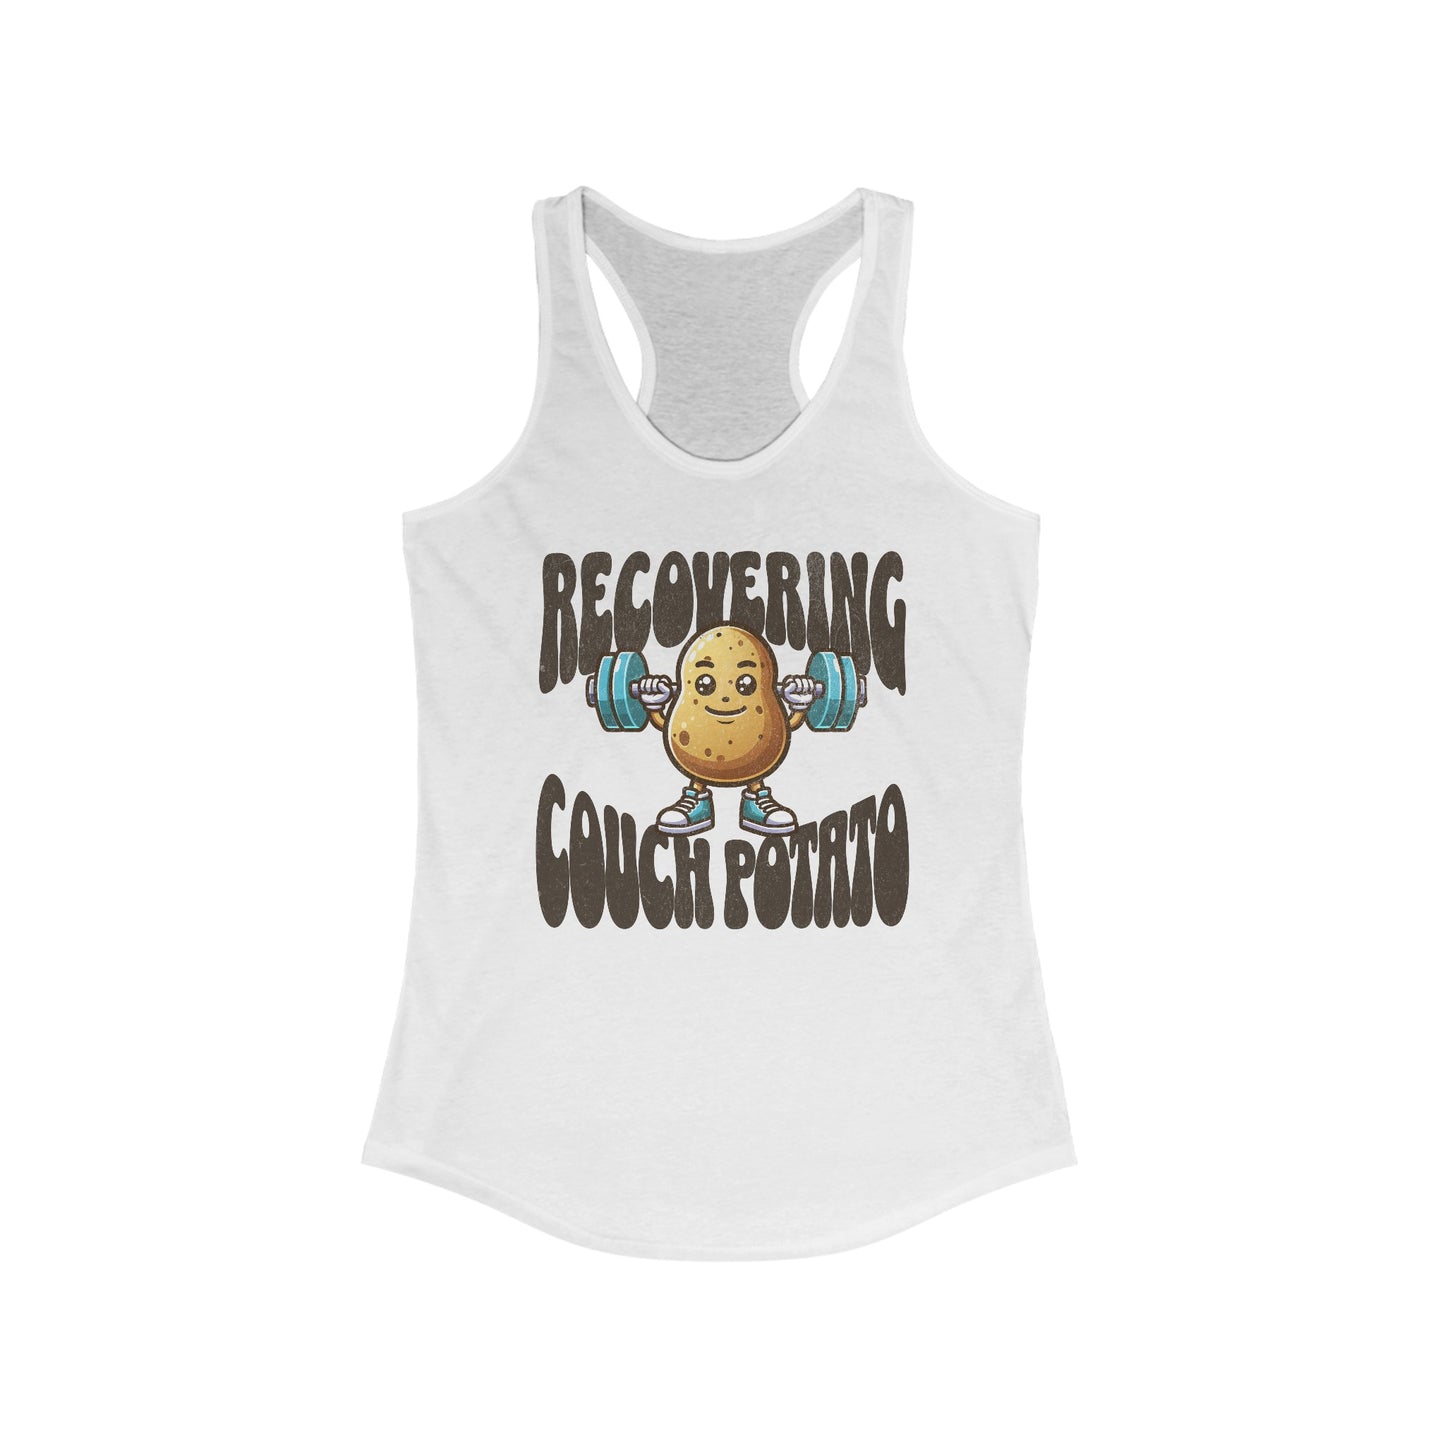 "Recovering Couch Potato" Gym Tank